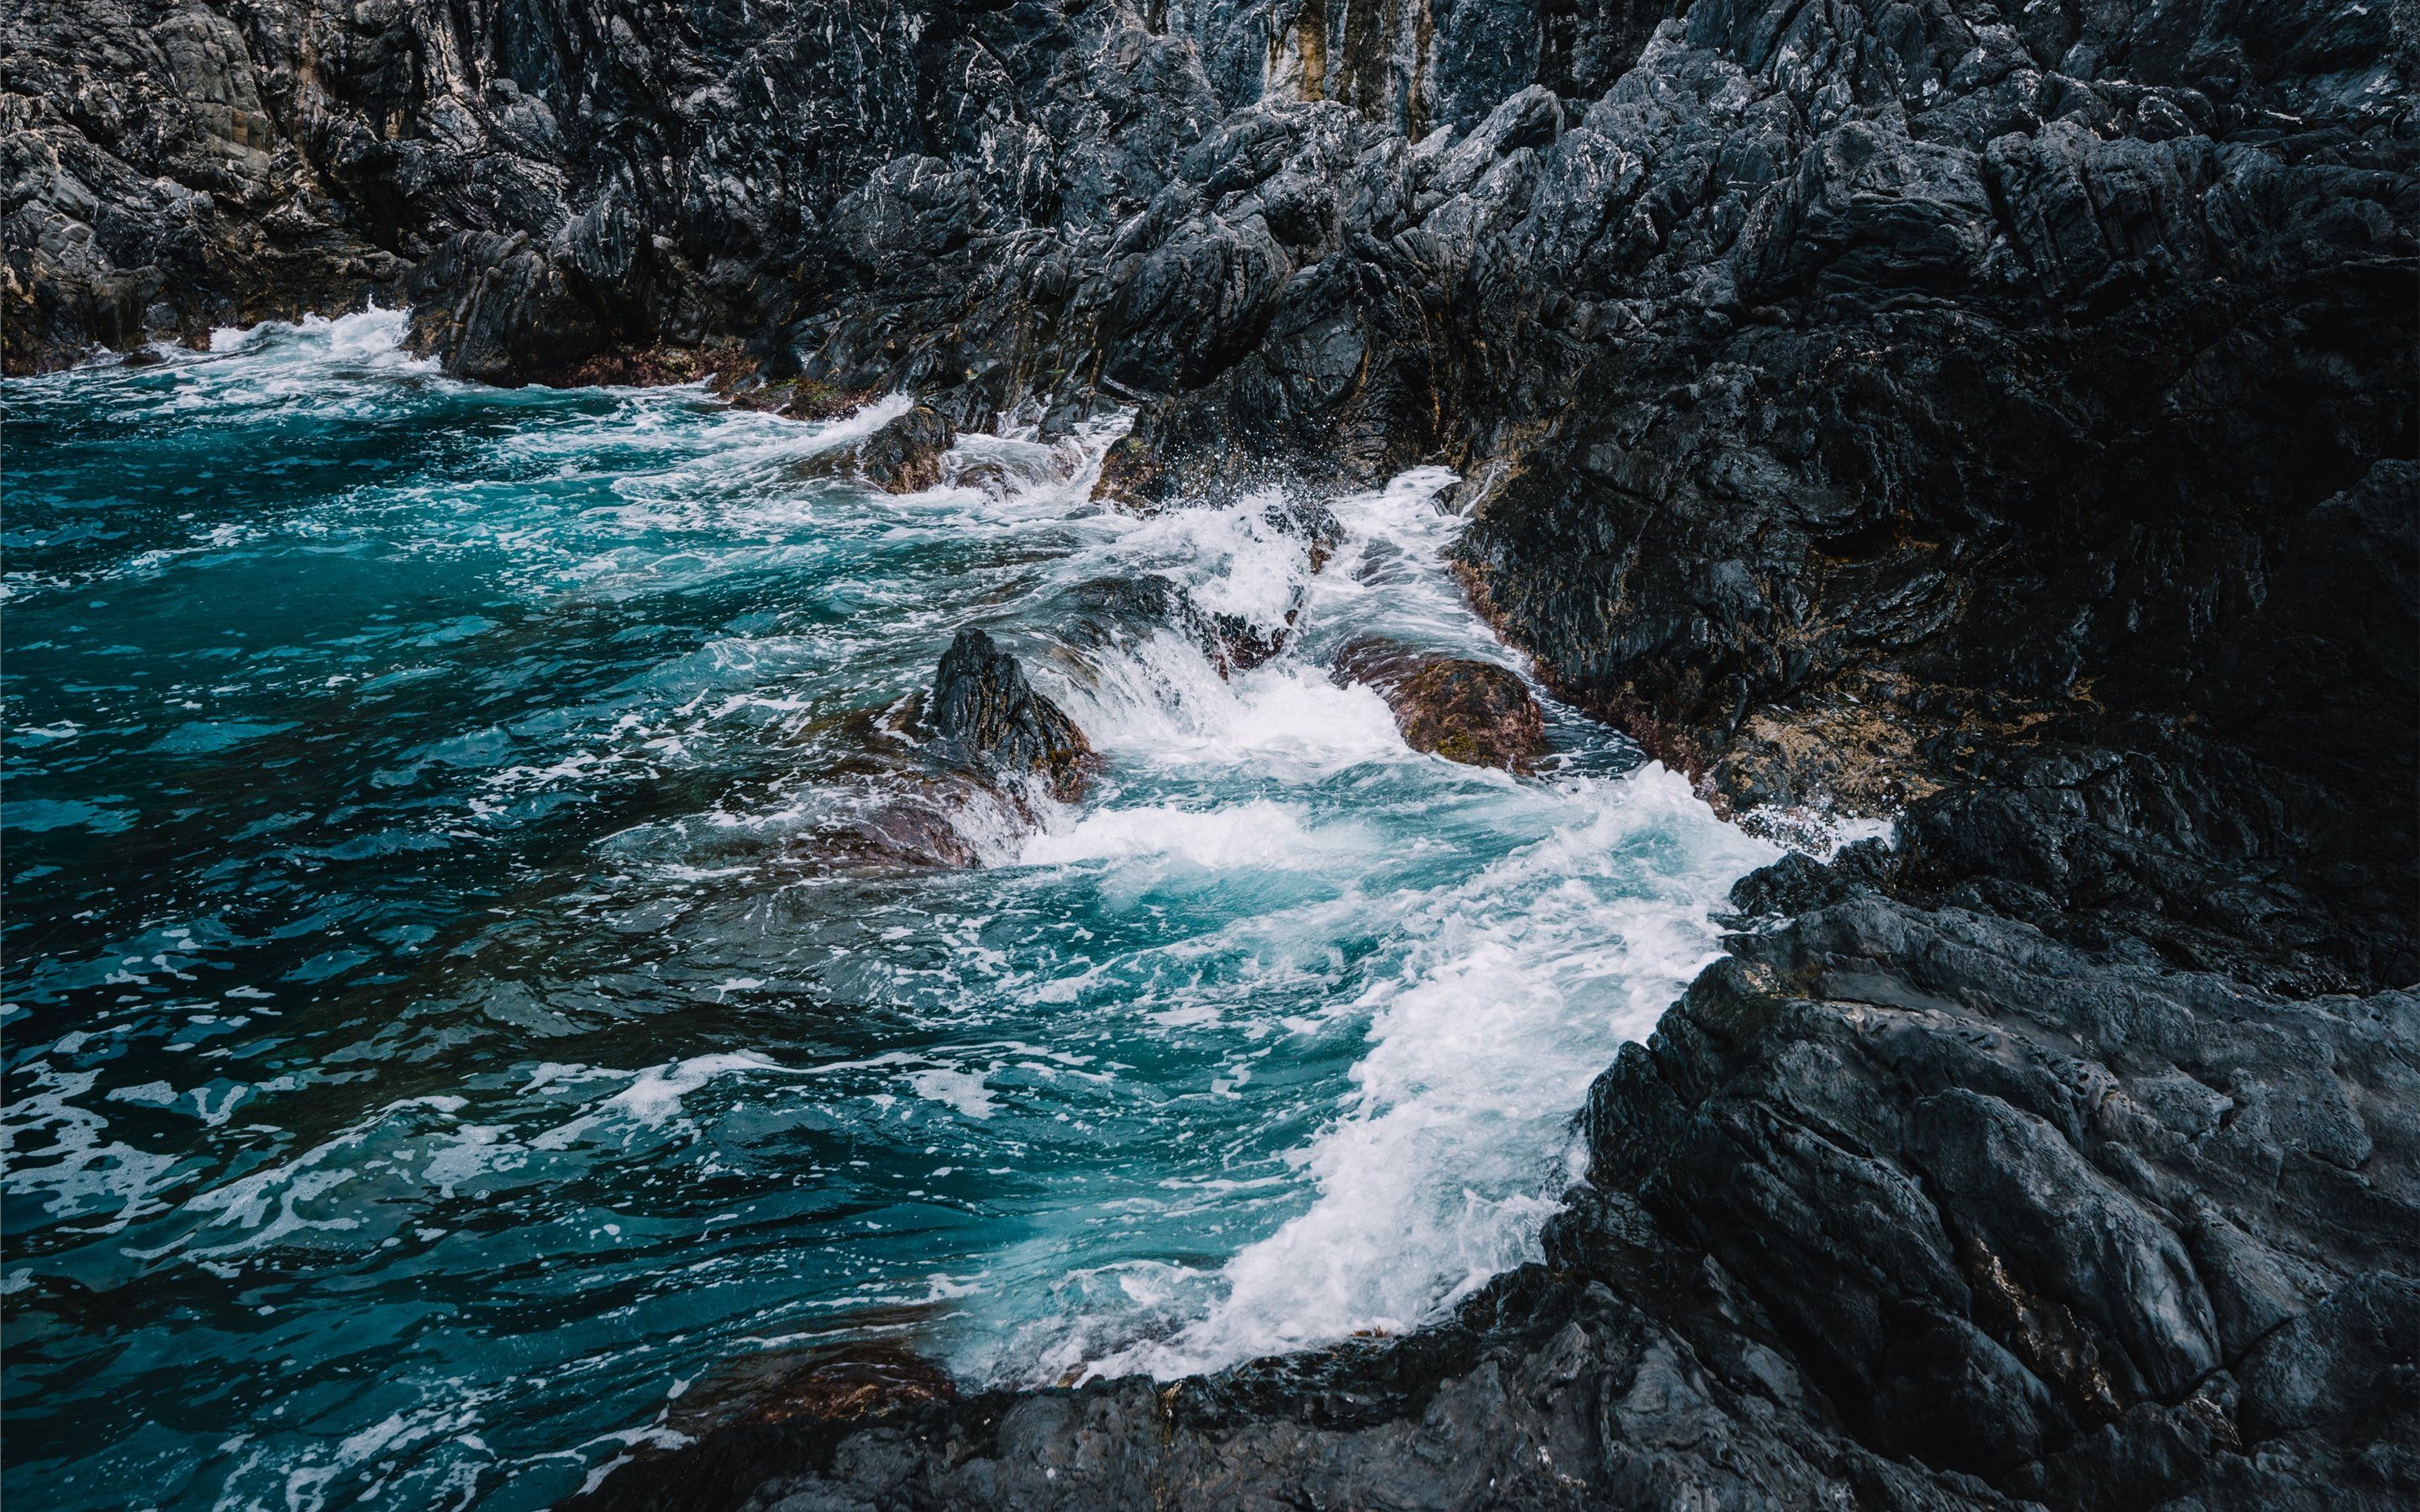 A rocky shore with waves crashing against it - Wave